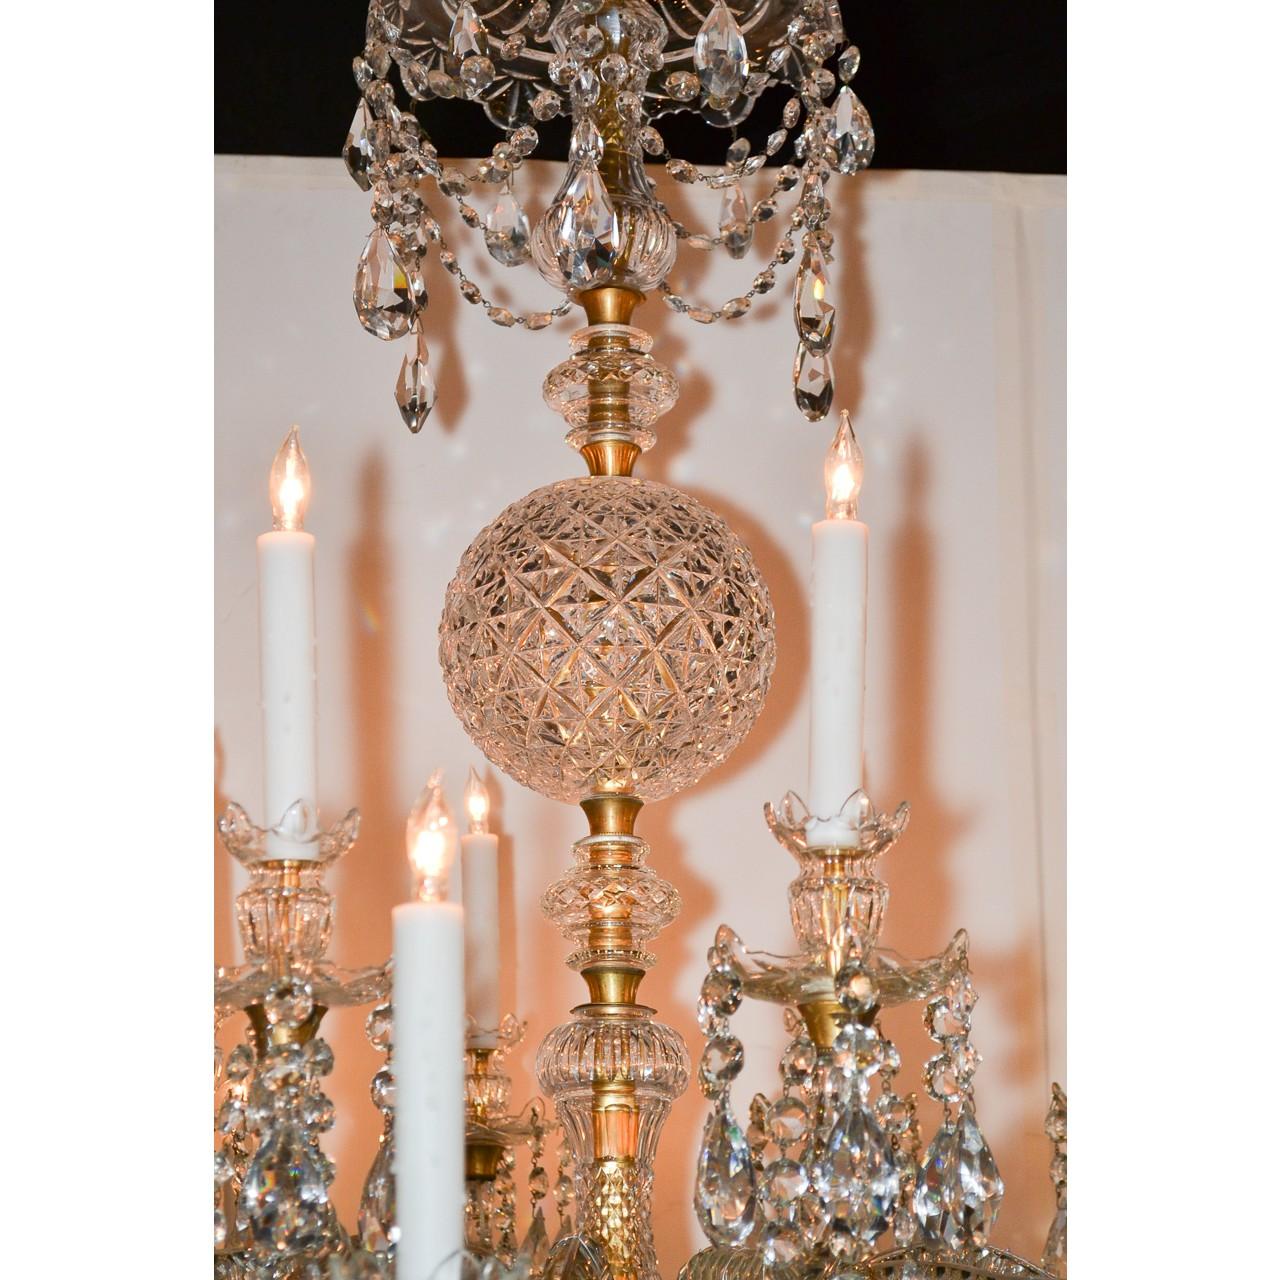 Incomparable and palatial antique French Baccarat crystal 20-light chandelier. The dome-shaped crystal crown with dangles of faceted almond-shaped prisms and crystal bead swags. The central stem accented with an eye-catching diamond pattern cut